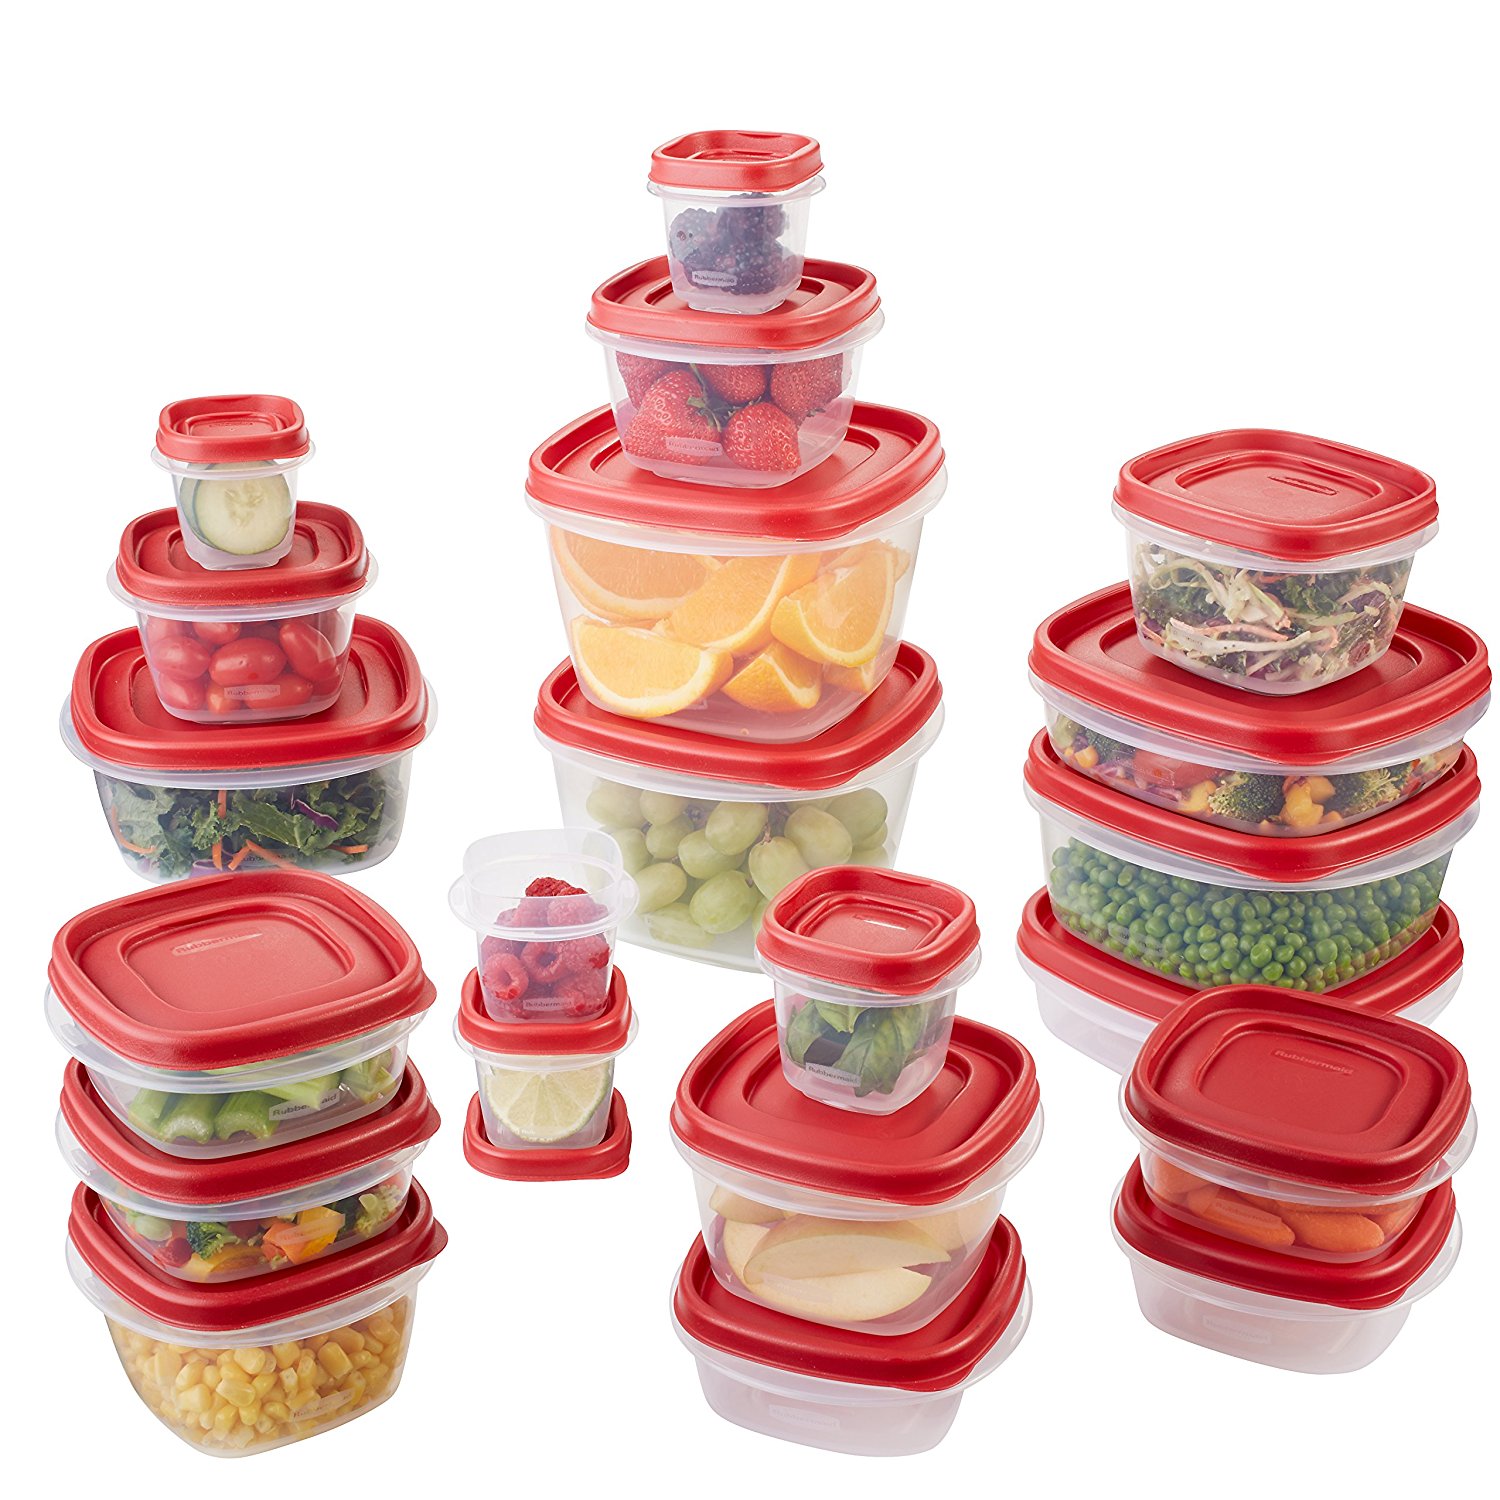 42-Piece Set, Red Food Storage Containers Under $10.00 – 50% Savings